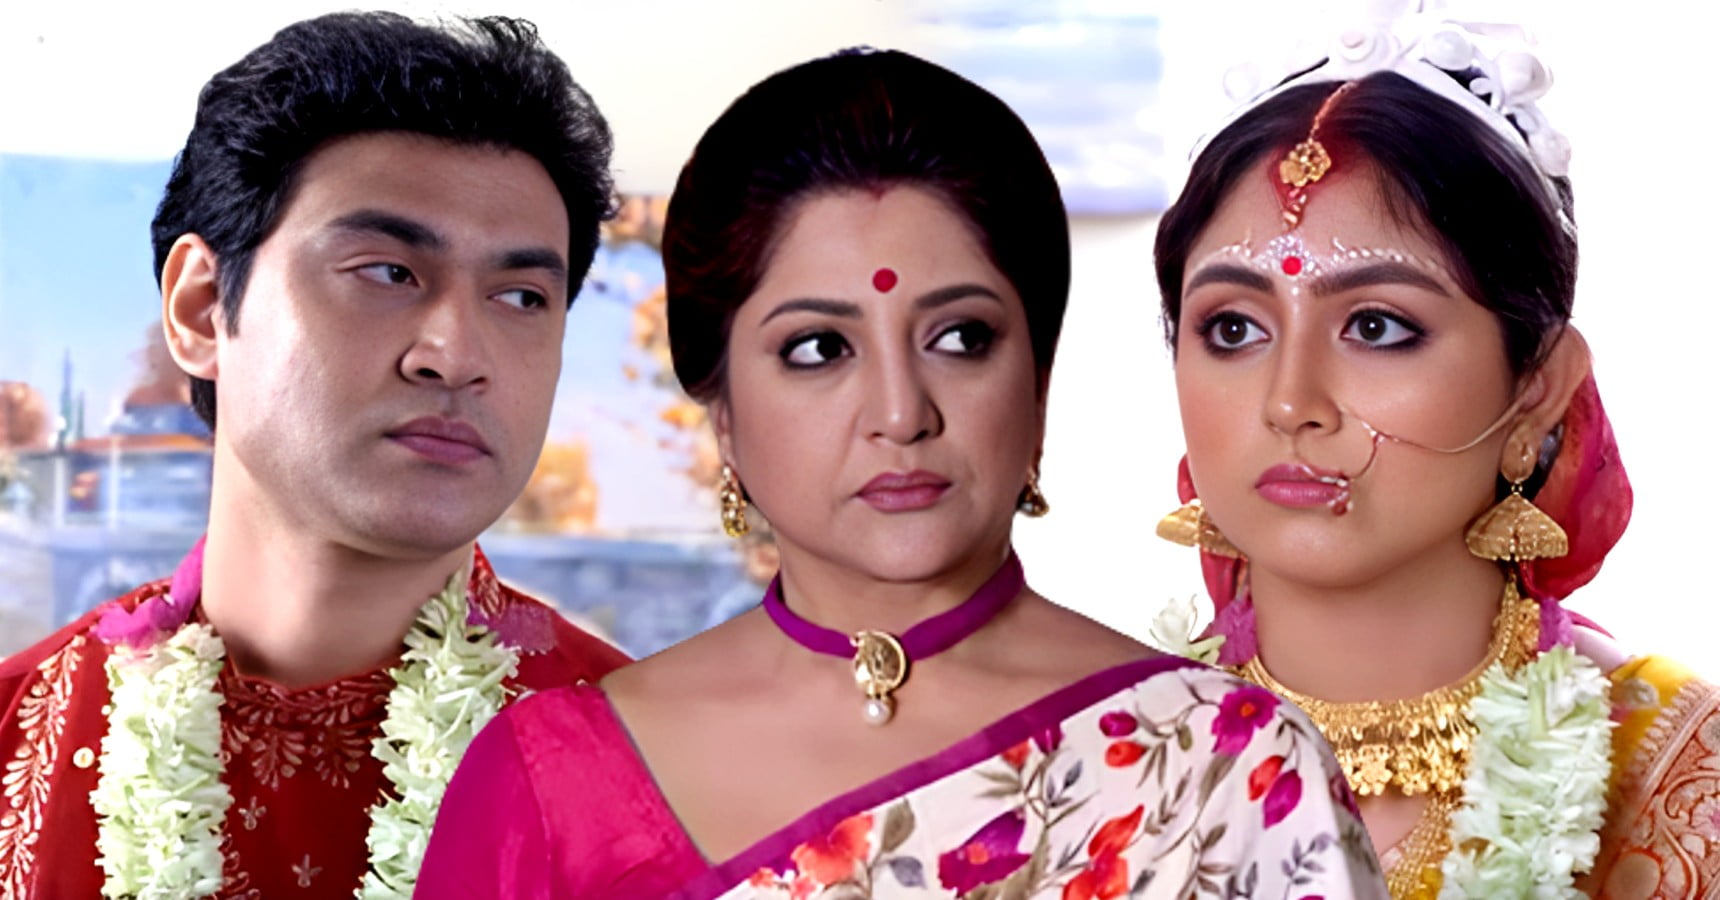 Zee Bangla Bengali serial Icche Putul Gini will see Rup’s real face soon